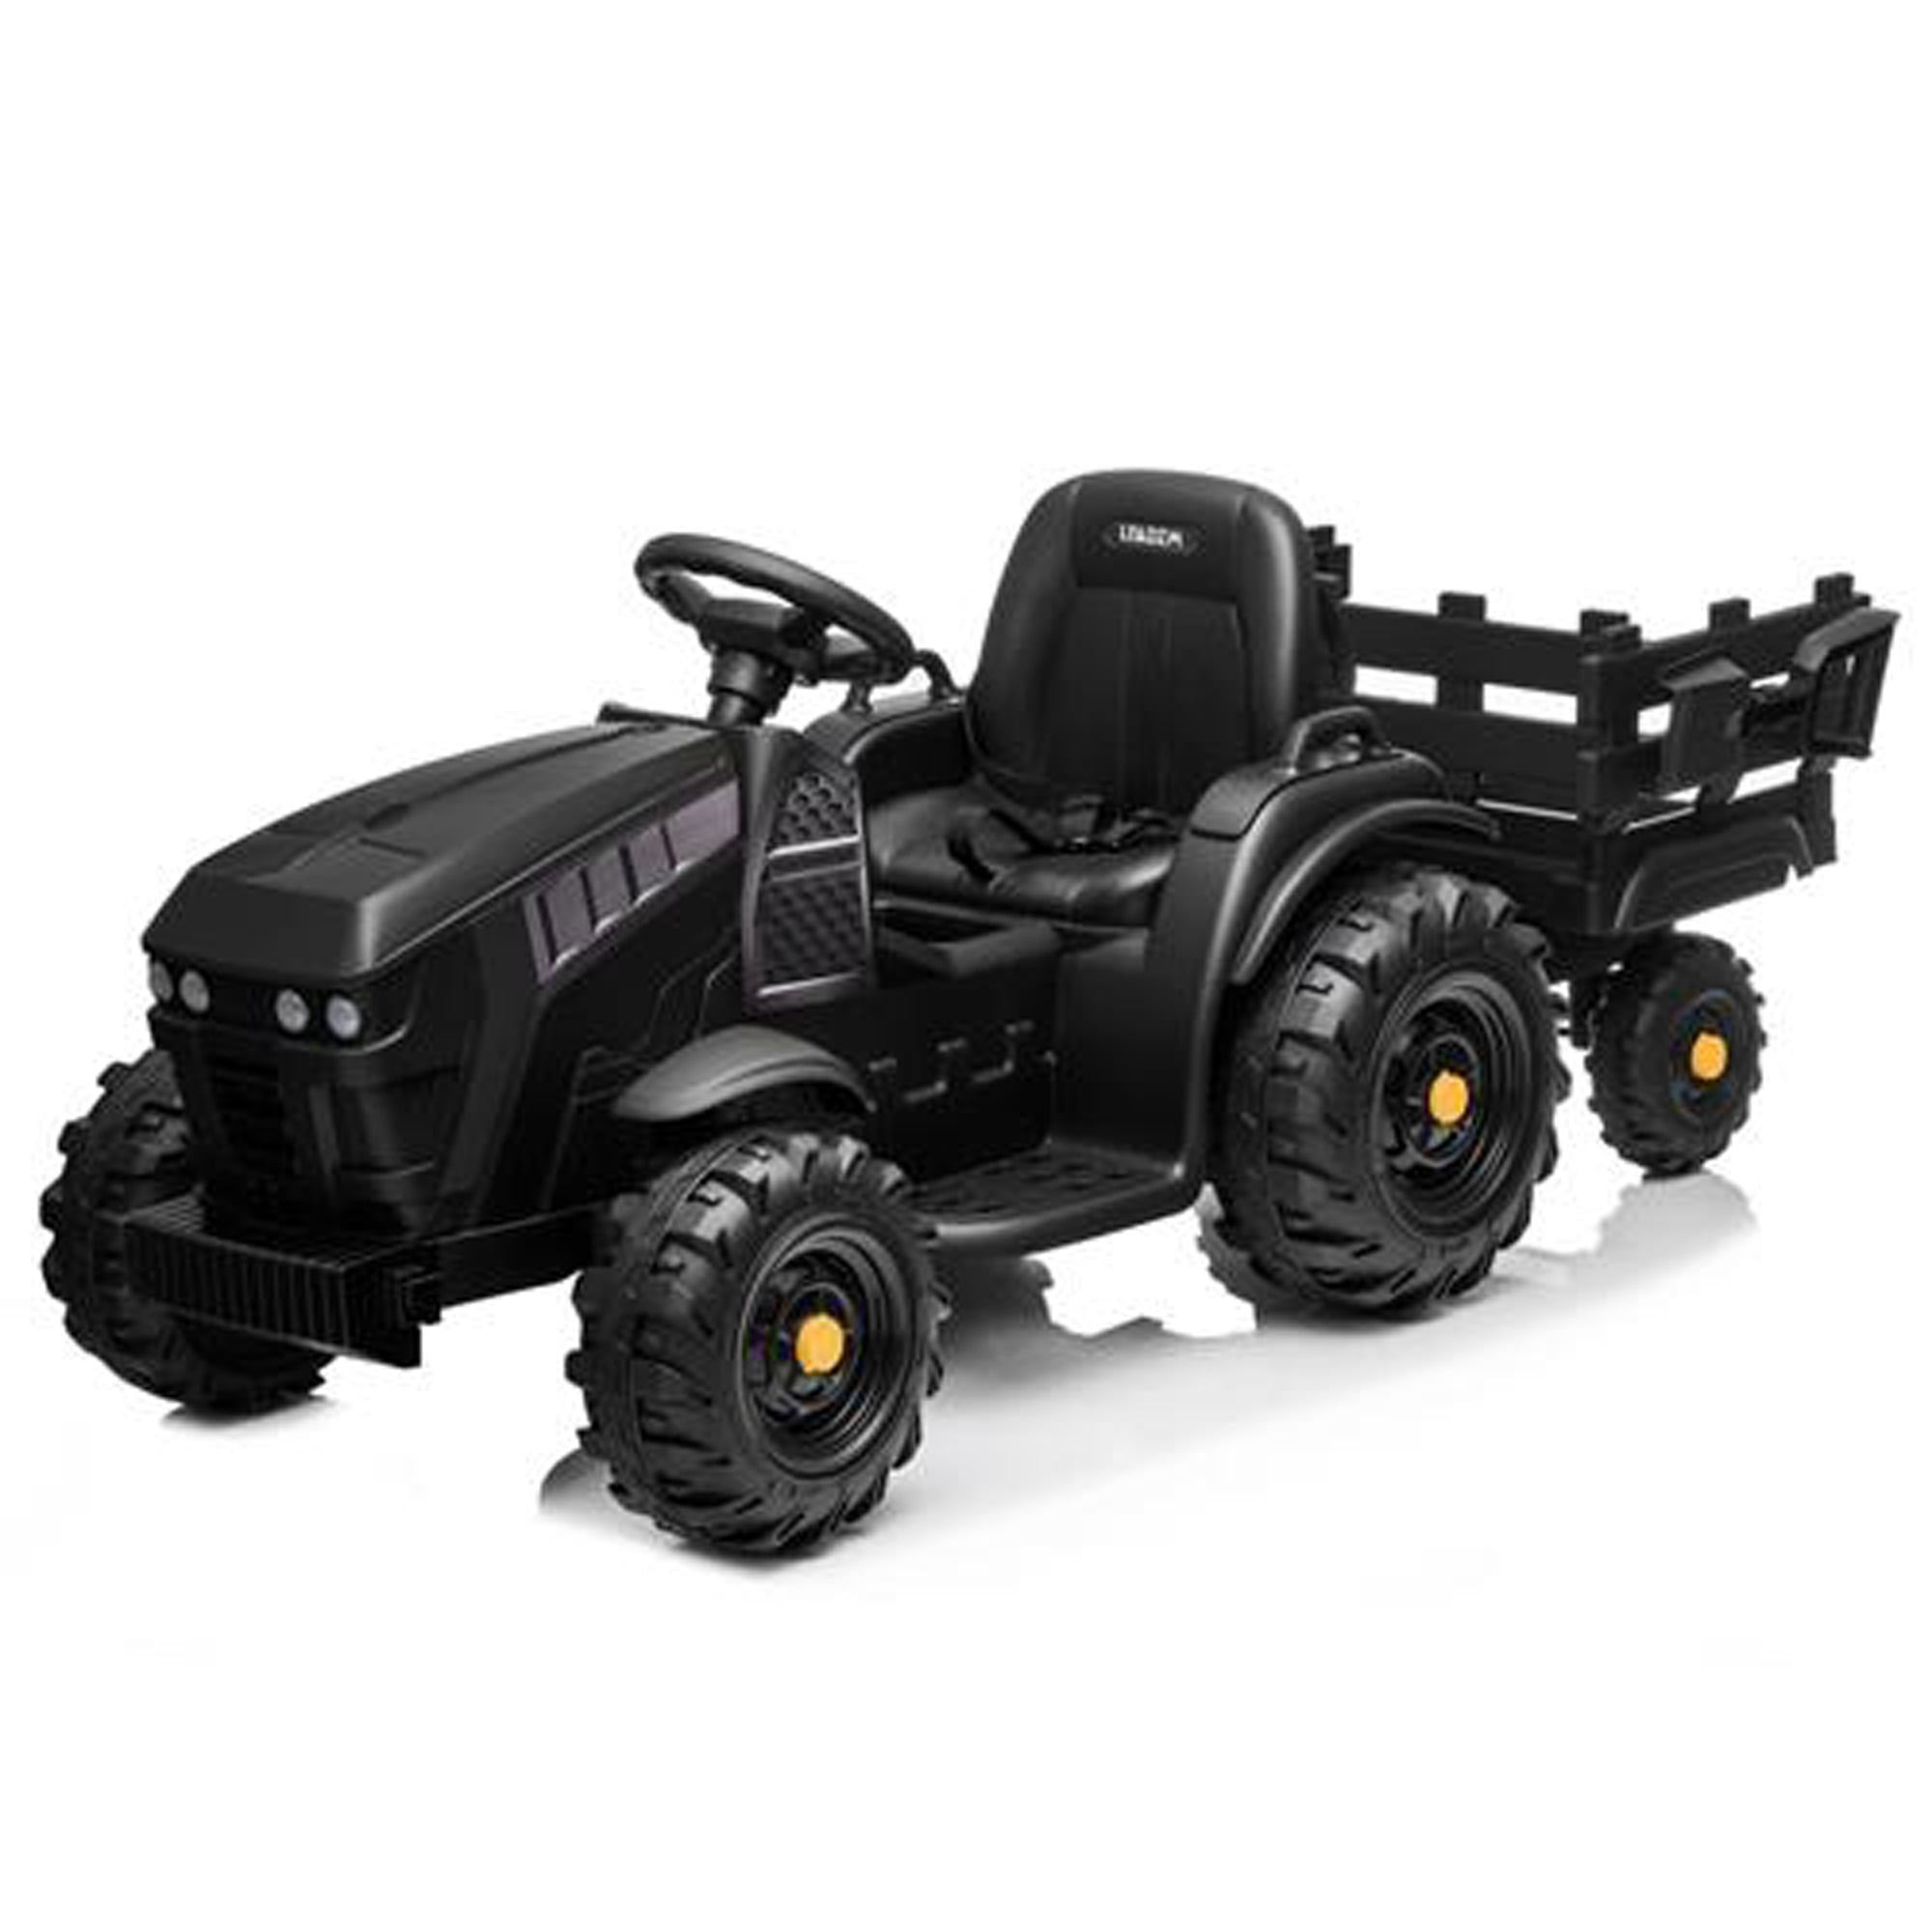 12V Kids Ride On Tractor Car 2 in 1 Toys MP3 2 Speeds with Large Trailer Black 